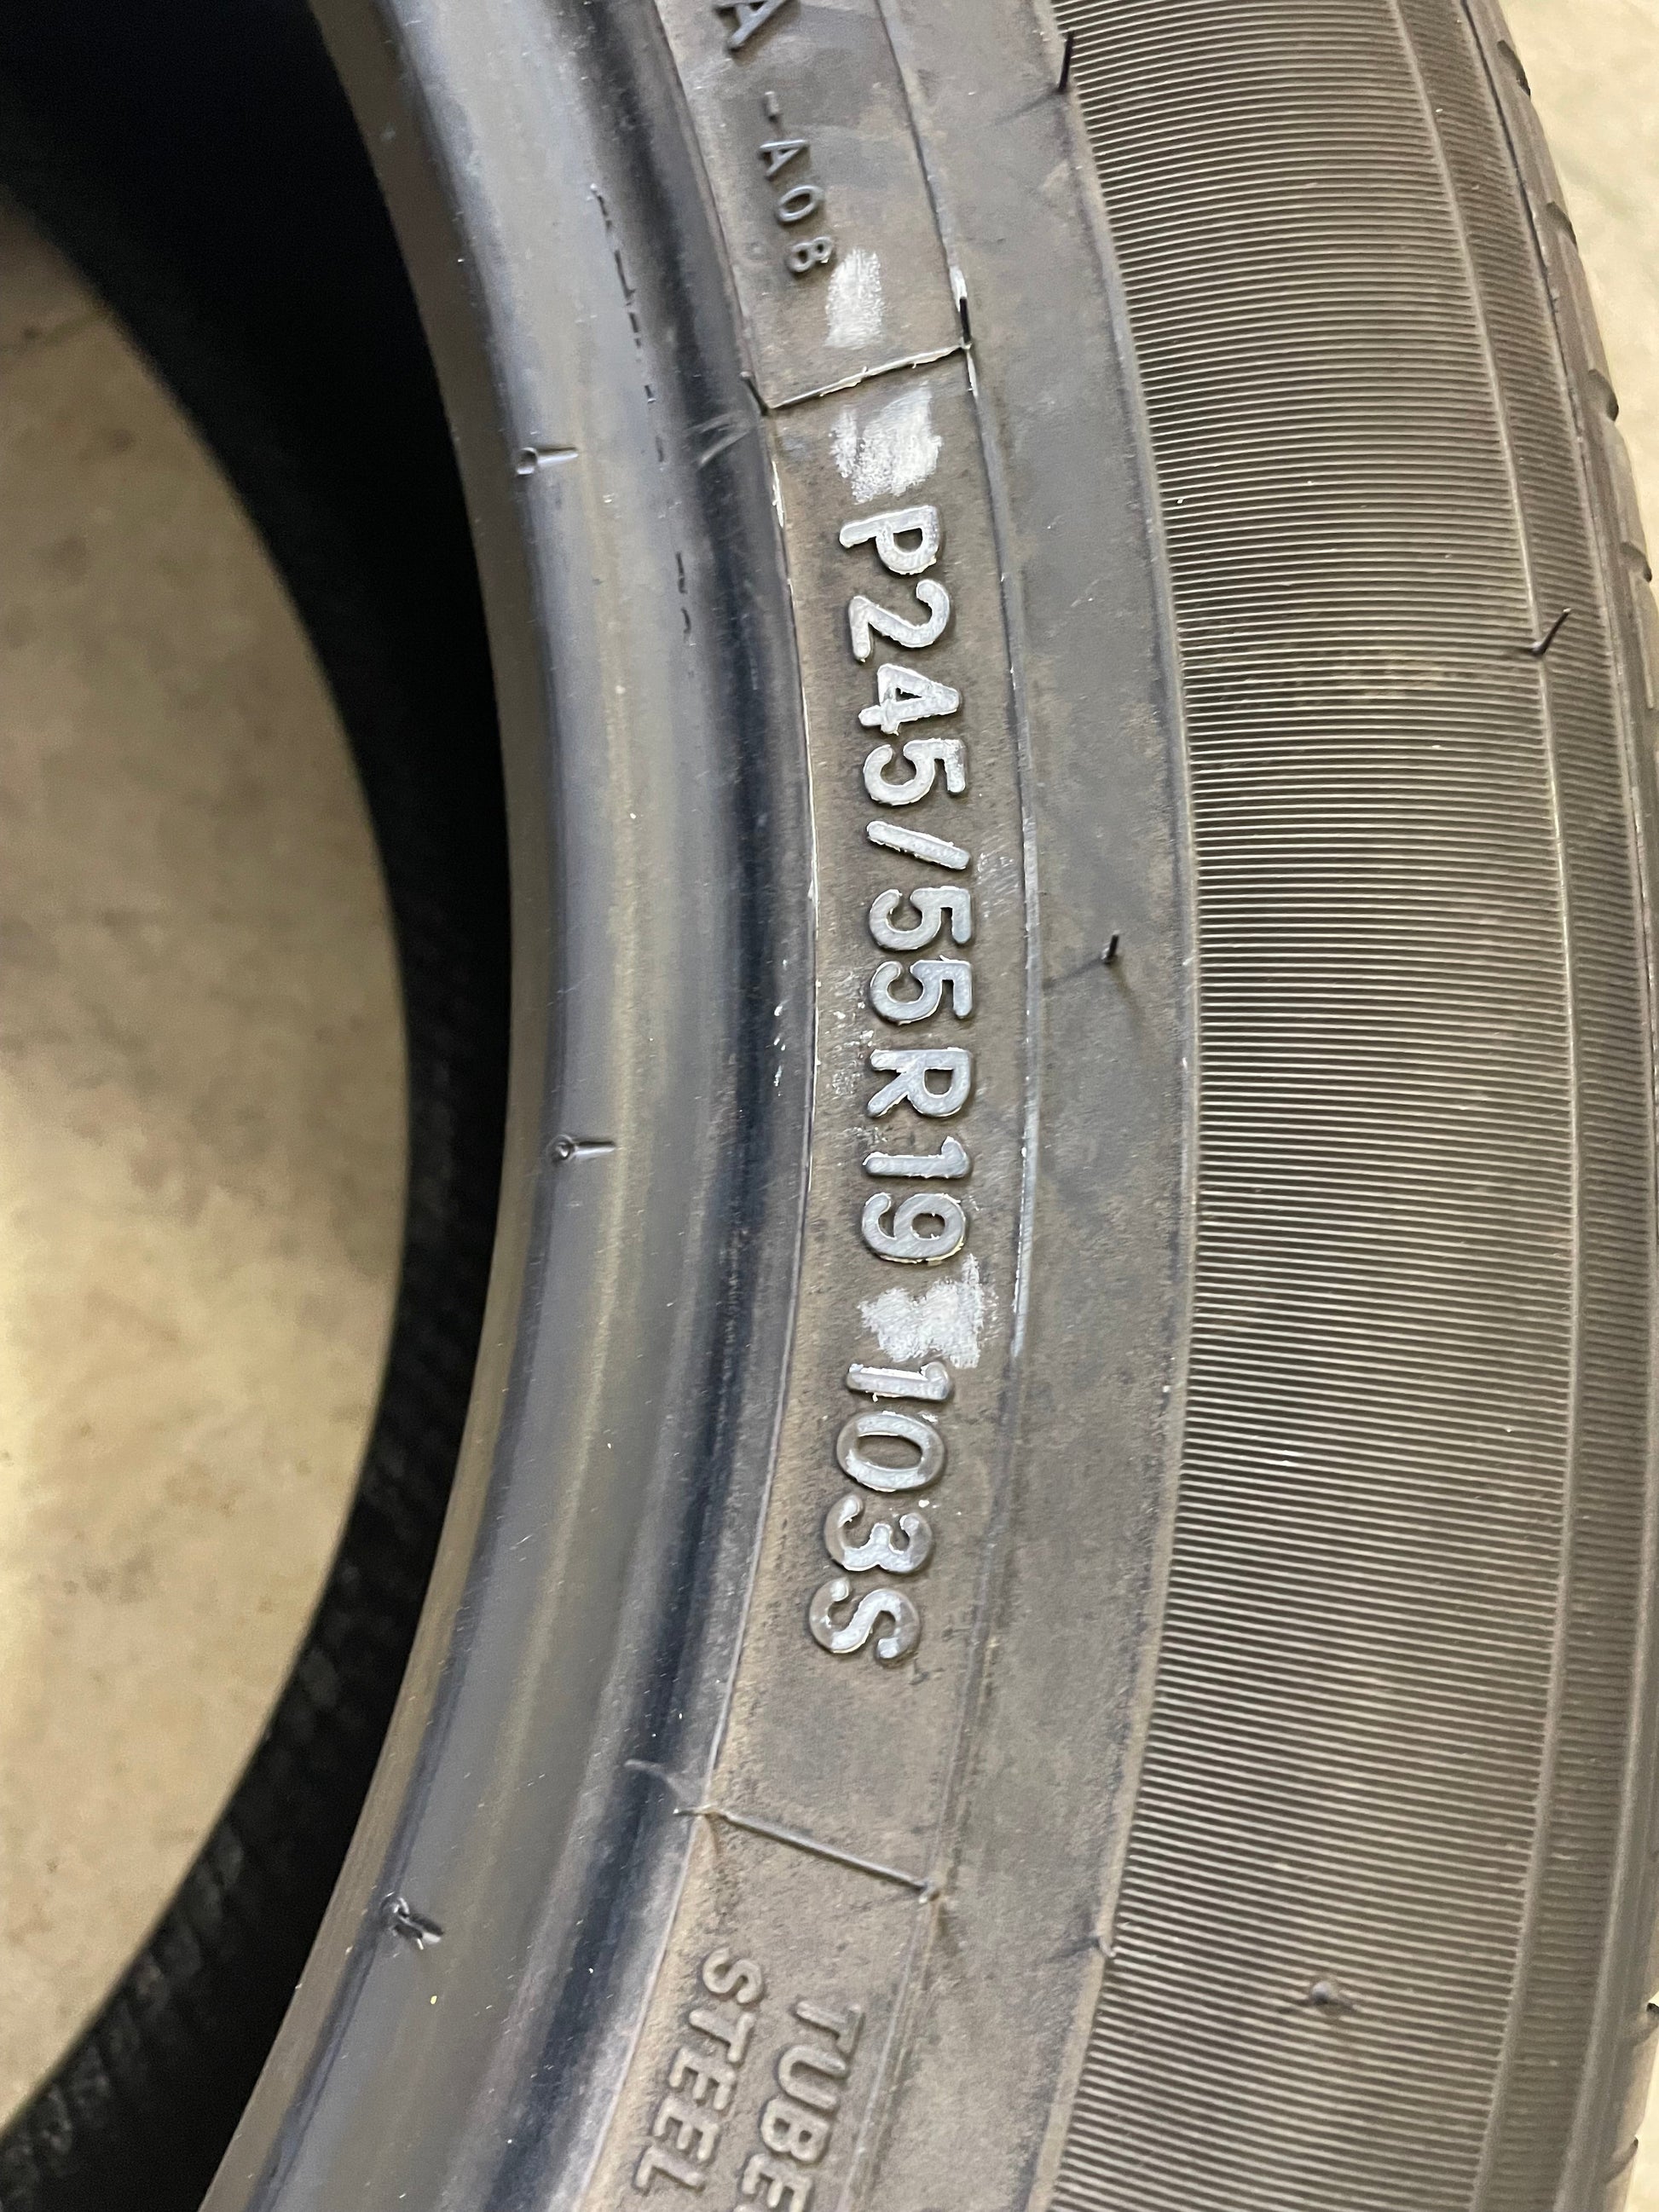 SINGLE 245/55R19 Toyo Open Country A20 103 S SL - Premium Used Tires